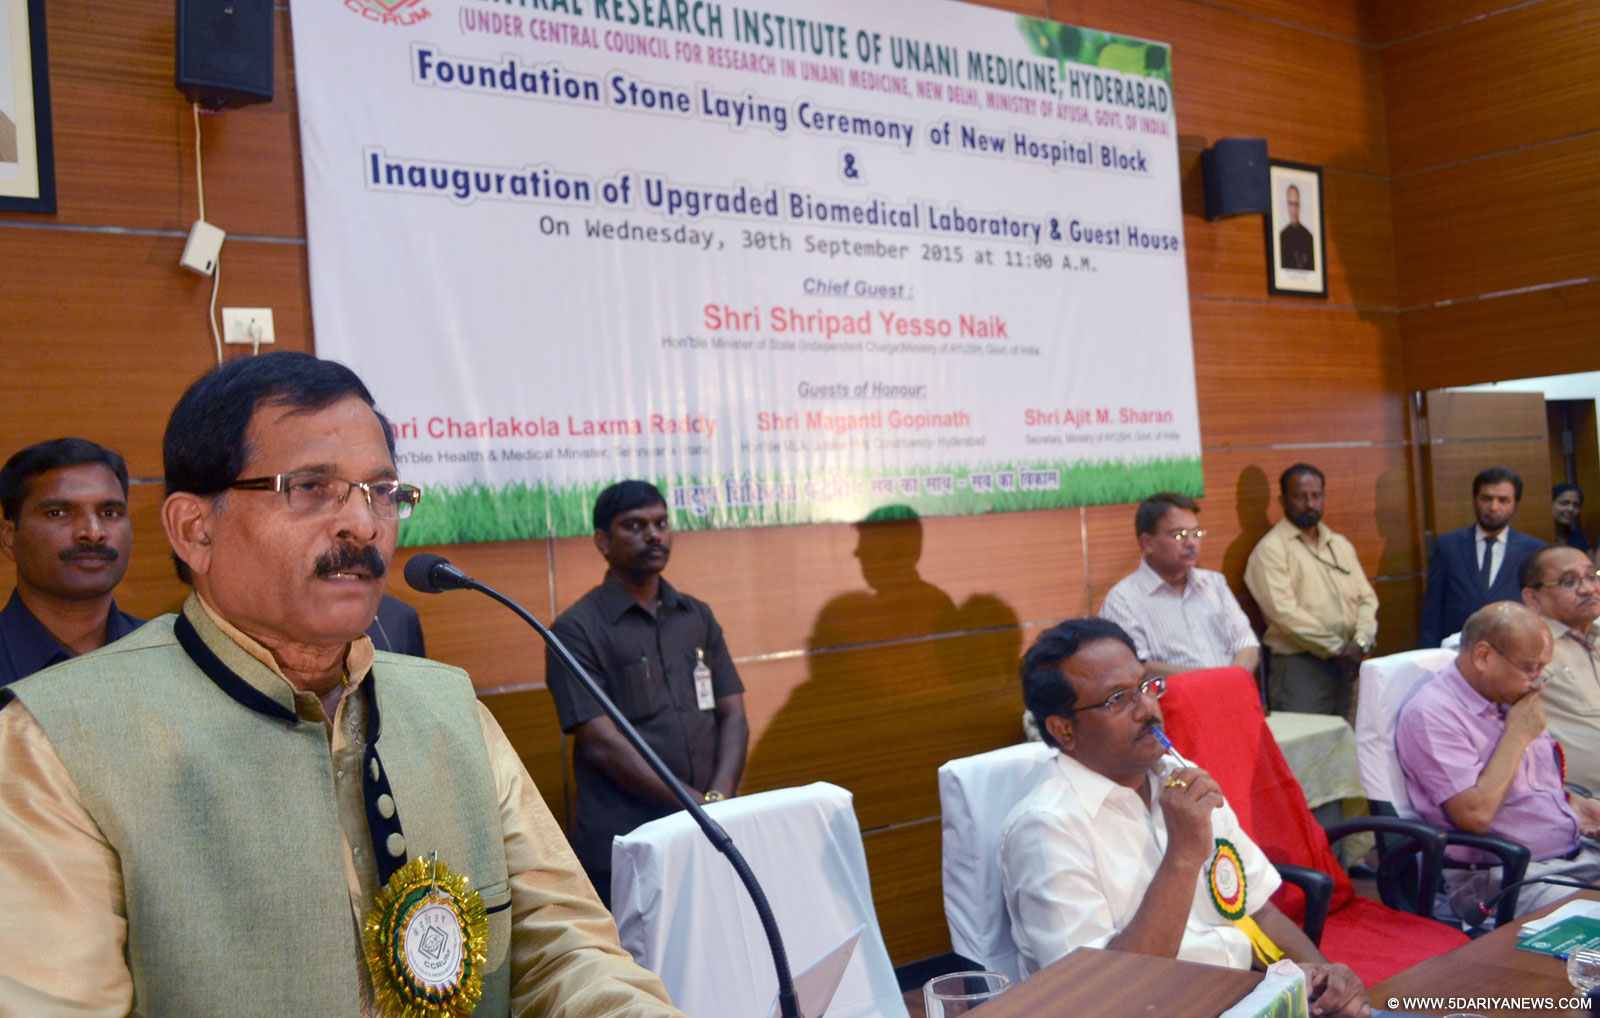 The Minister of State for AYUSH (Independent Charge) and Health & Family Welfare, Shri Shripad Yesso Naik addressing at the foundation stone laying ceremony of New Hospital block, inauguration of Upgraded Biomedical Laboratory and Guest House, at Central Research Institute of Unani Medicine, in Hyderabad on September 30, 2015.